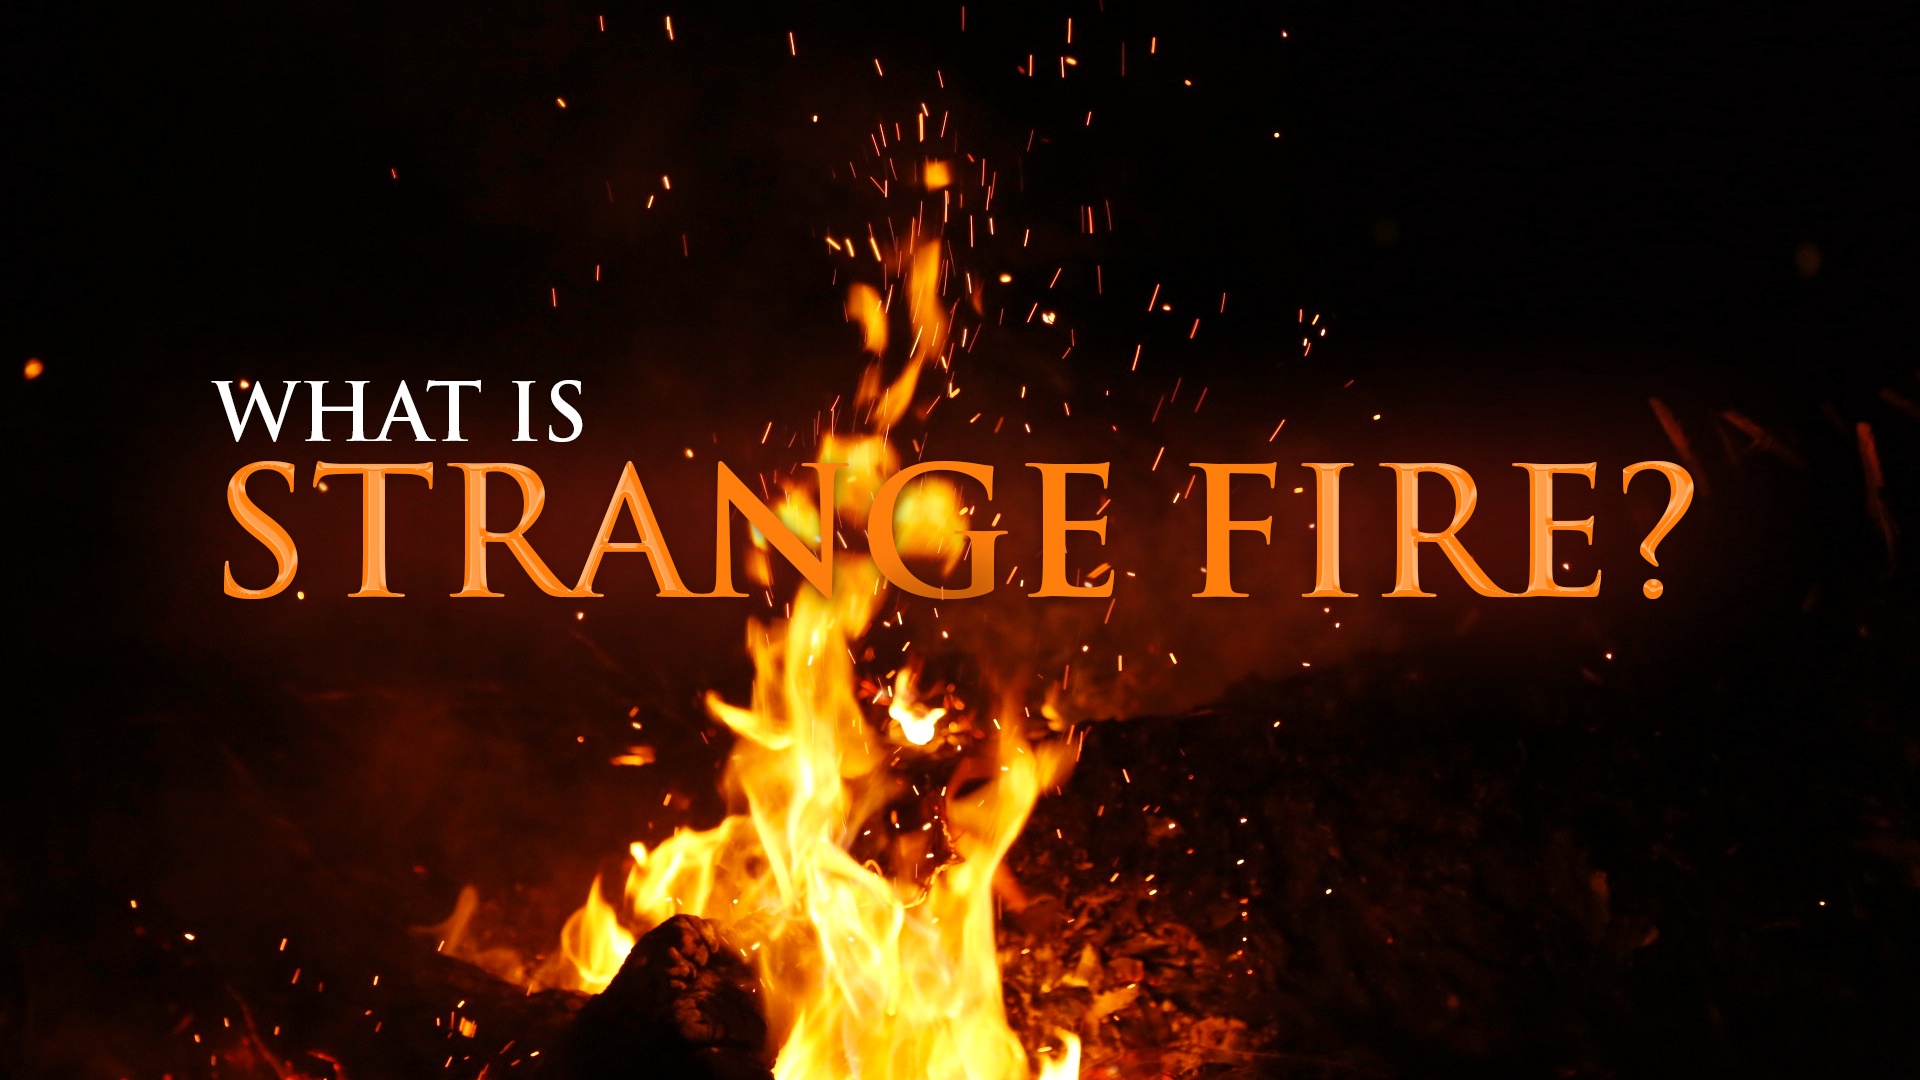 Strange Fire What Is Strange Fire & What Does The Bible Say About It?